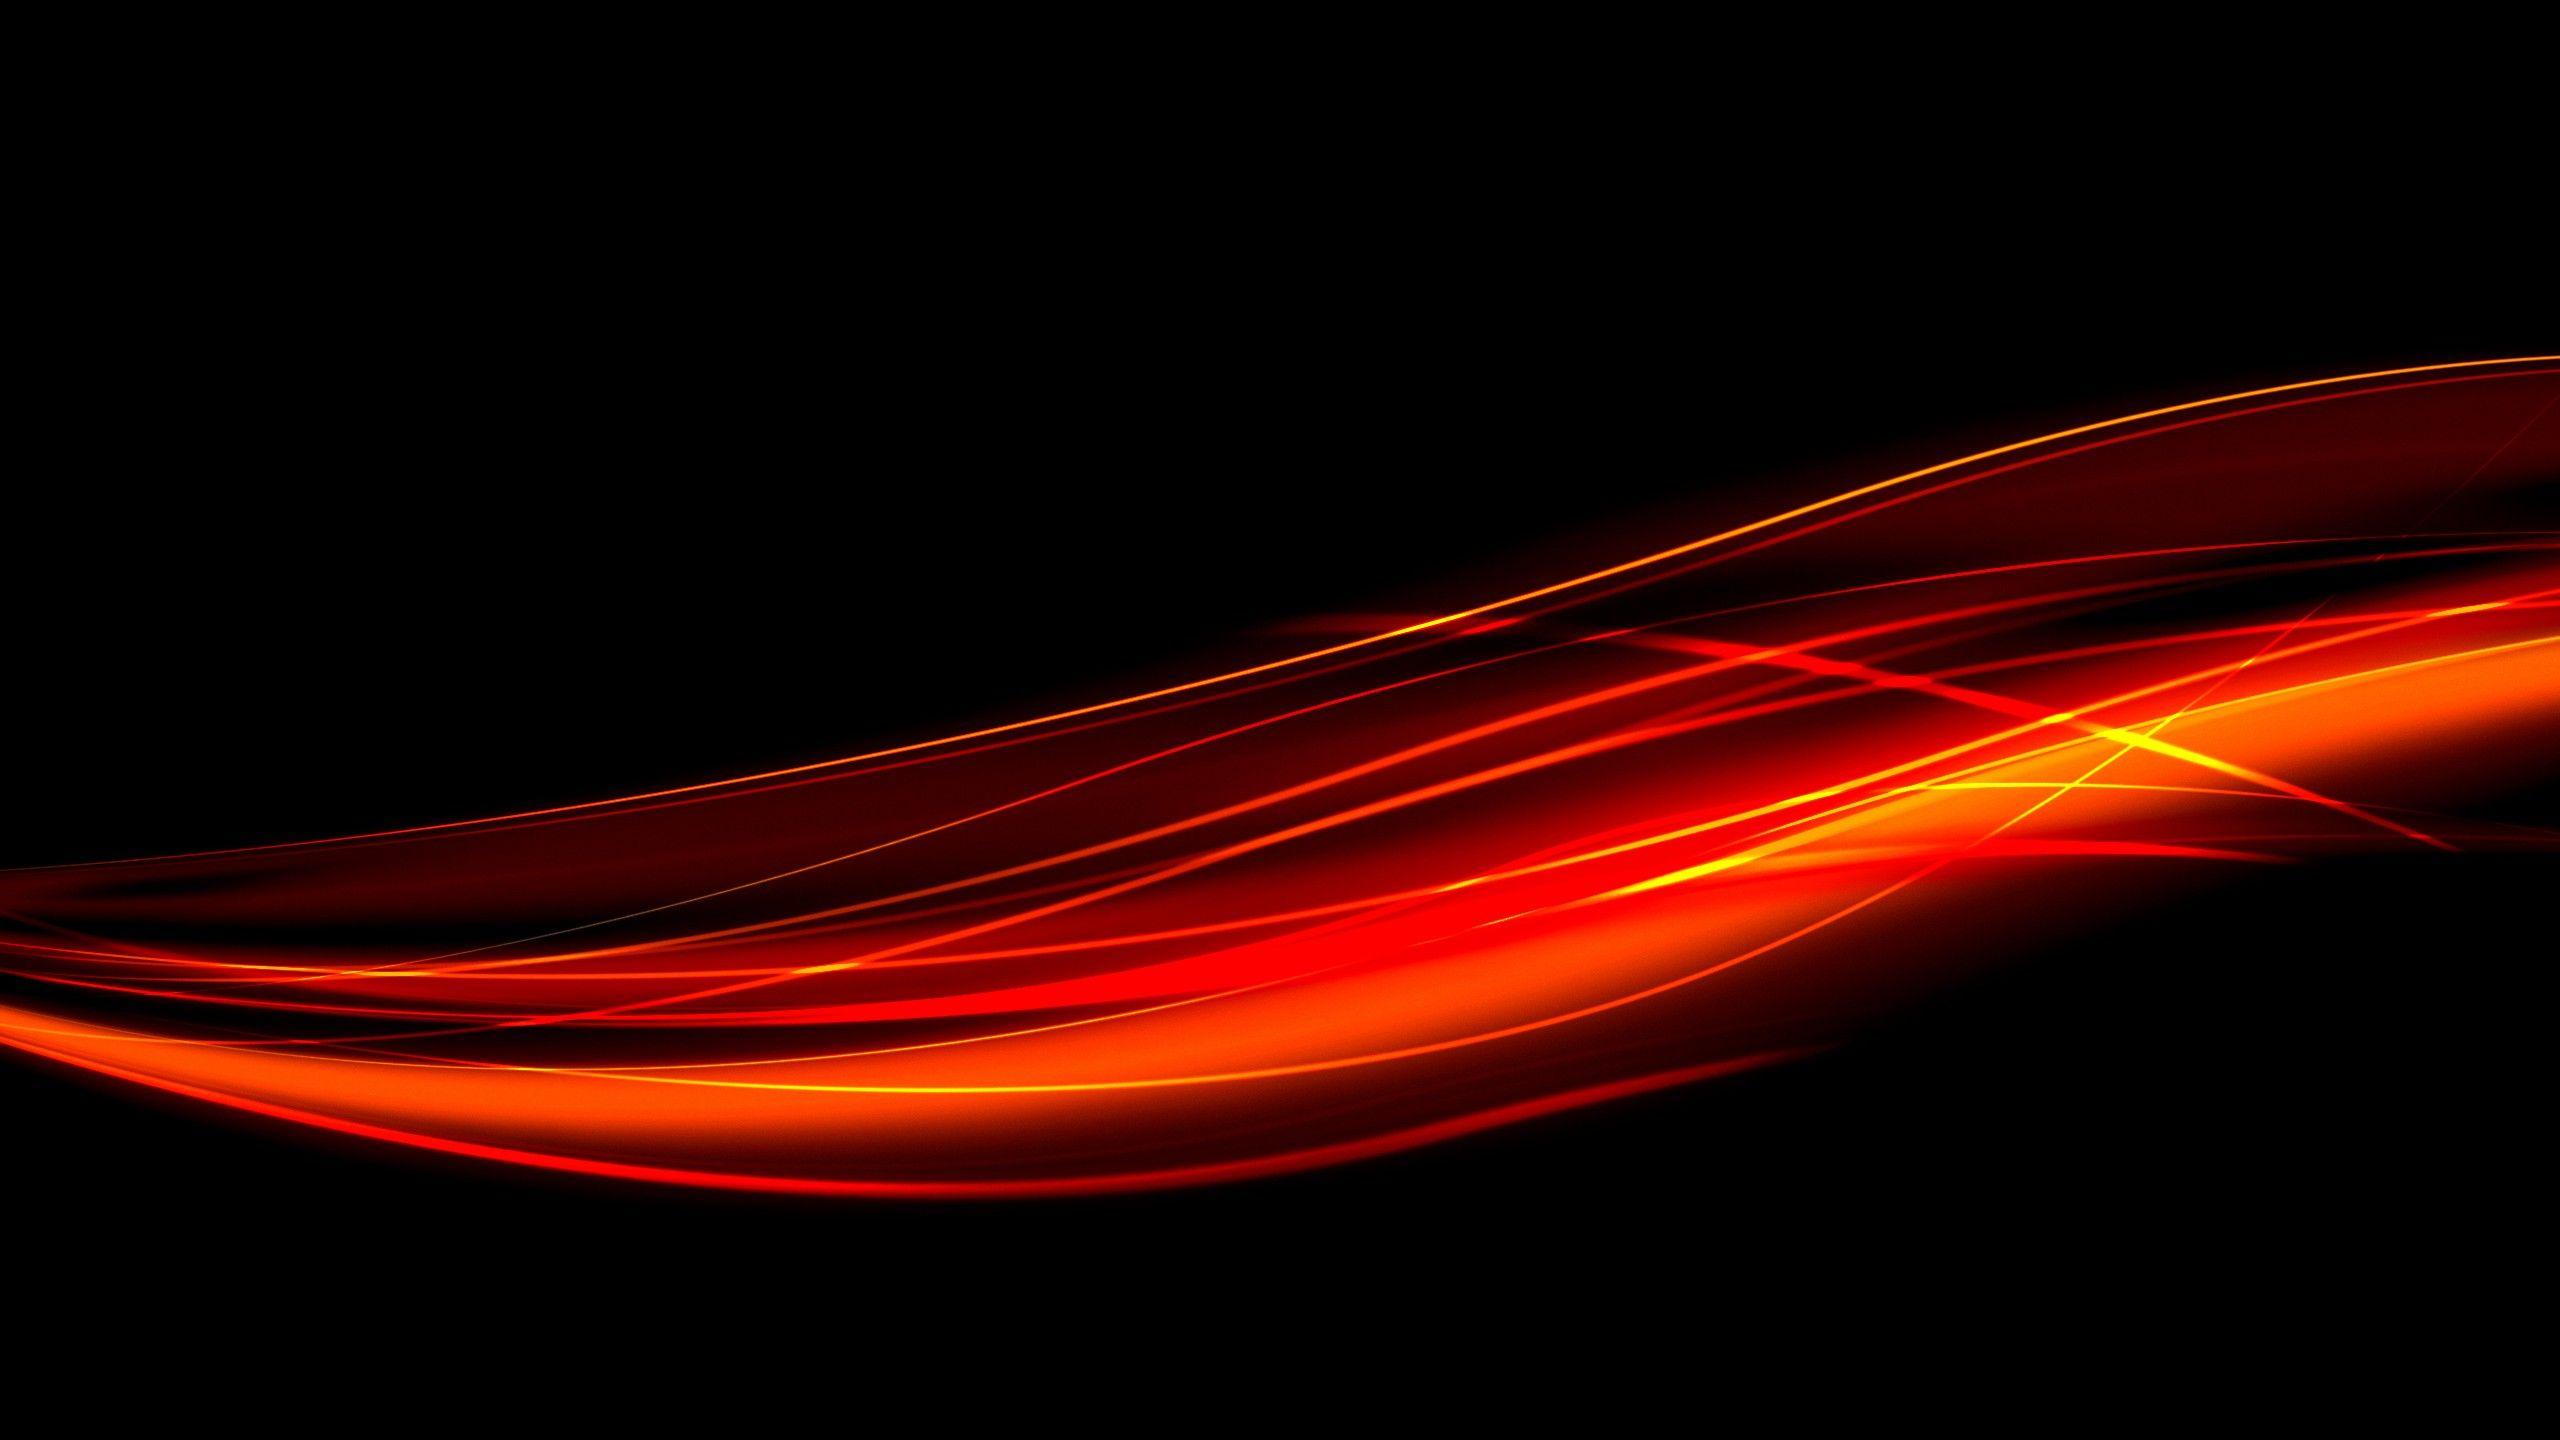 Orange Red Background Images HD Pictures and Wallpaper For Free Download   Pngtree